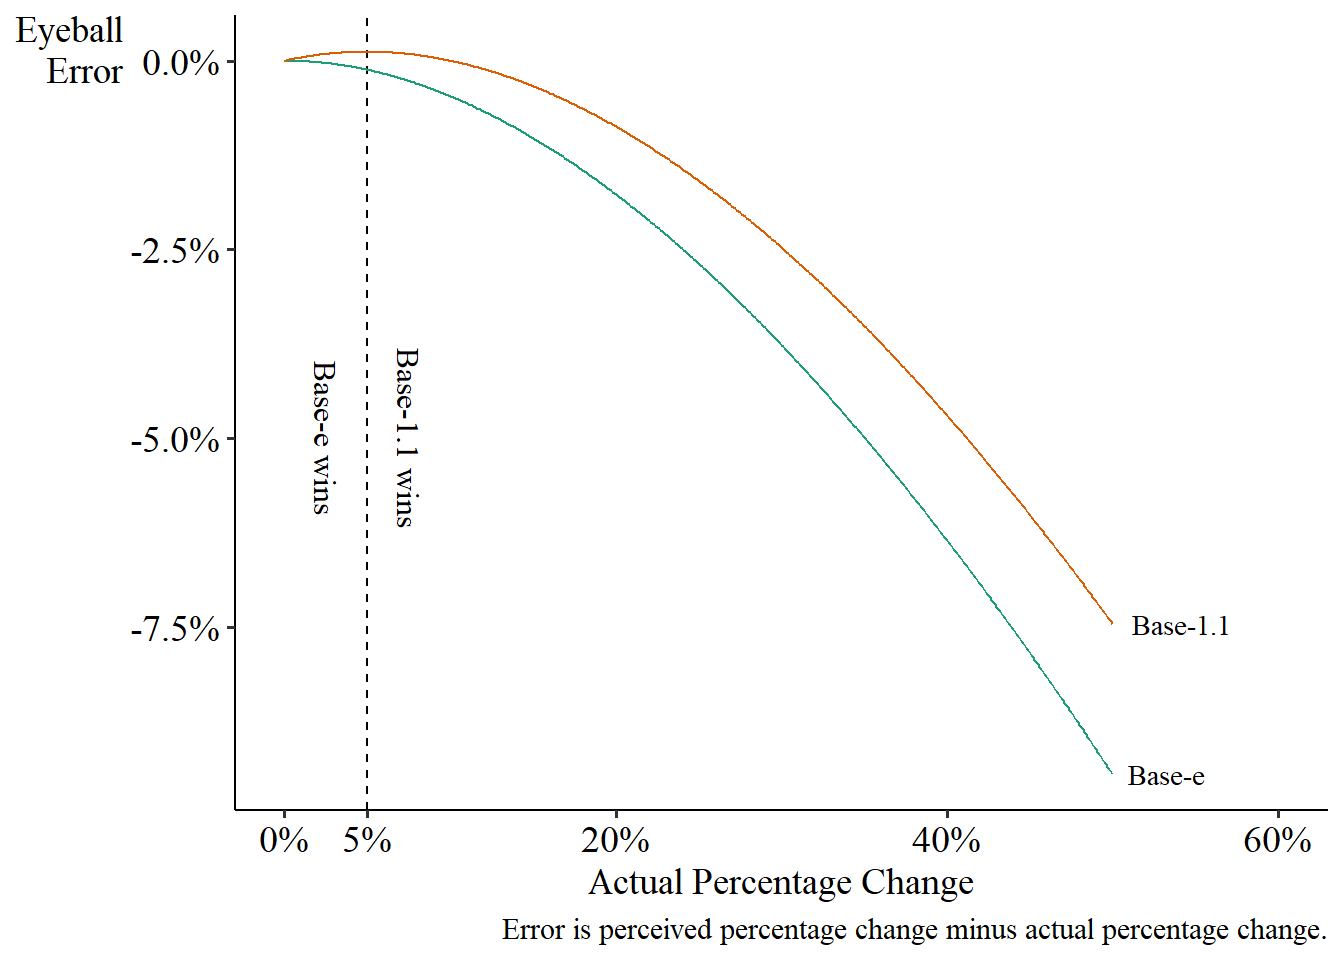 Graph showing error from base-e logs vs. base-1.1 Base-1.1 is worse below 5% actual changes, but only slightly, and is always better after that.